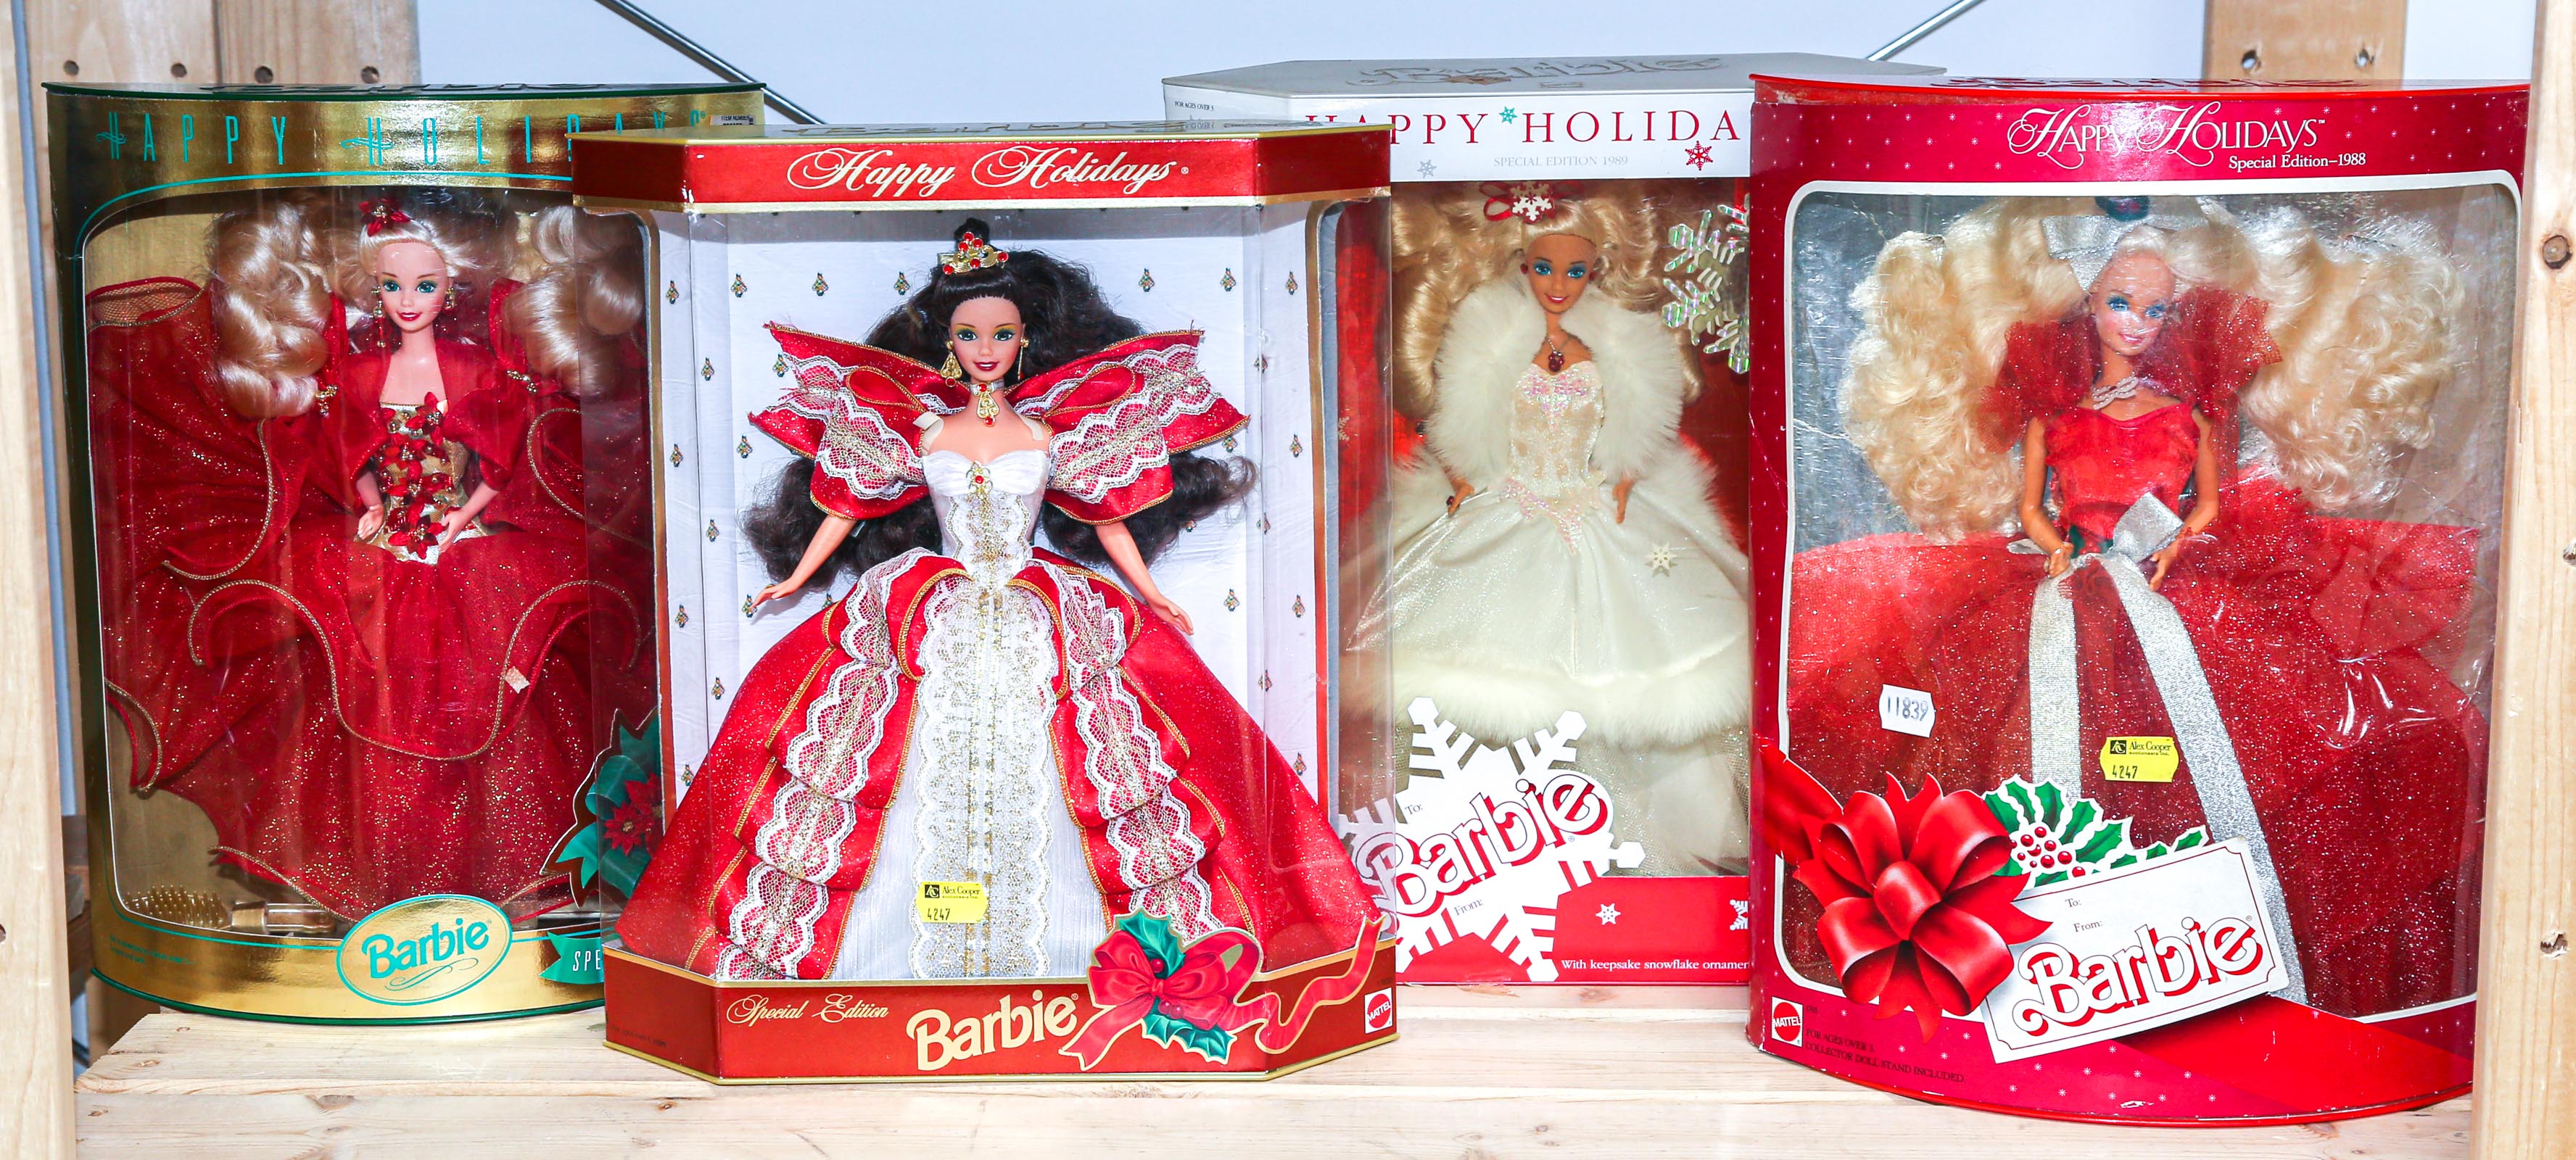 FOUR BOXED HAPPY HOLIDAY BARBIES All